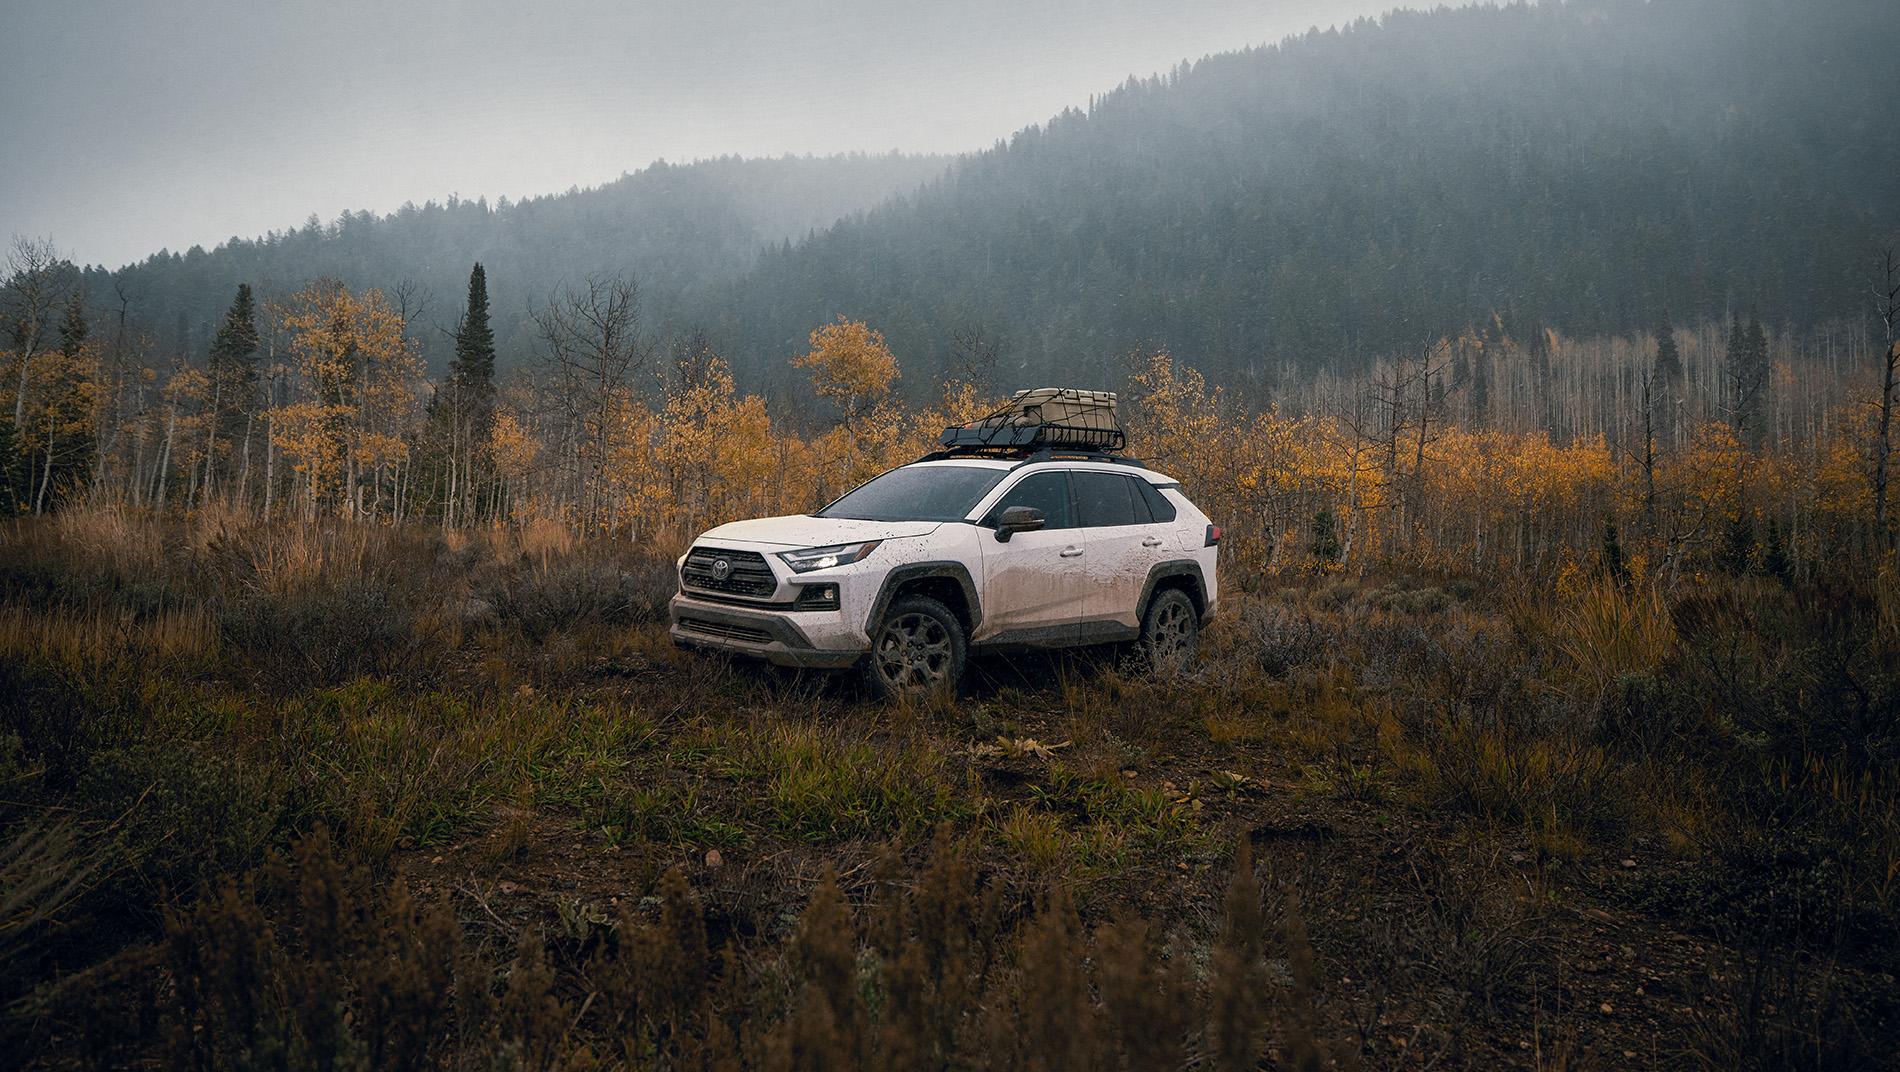 white Toyota RAV4 with cargo rack on roof rails in a meadow on a mountain